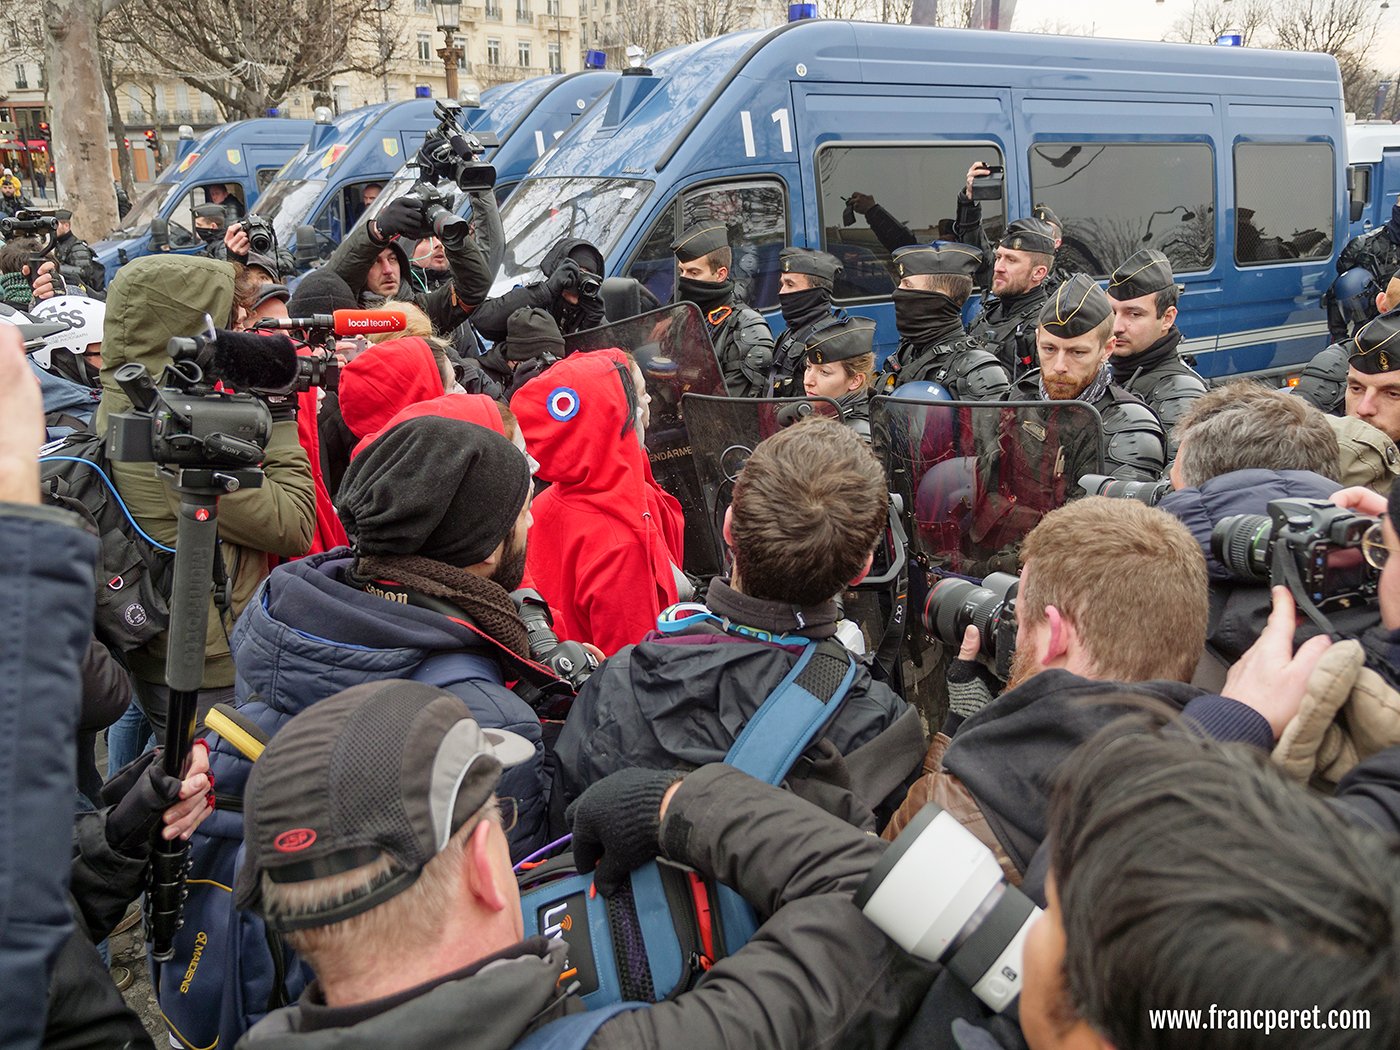 A huge number of journalists offer a wide range of pictures and video on the net concerning this series of protest